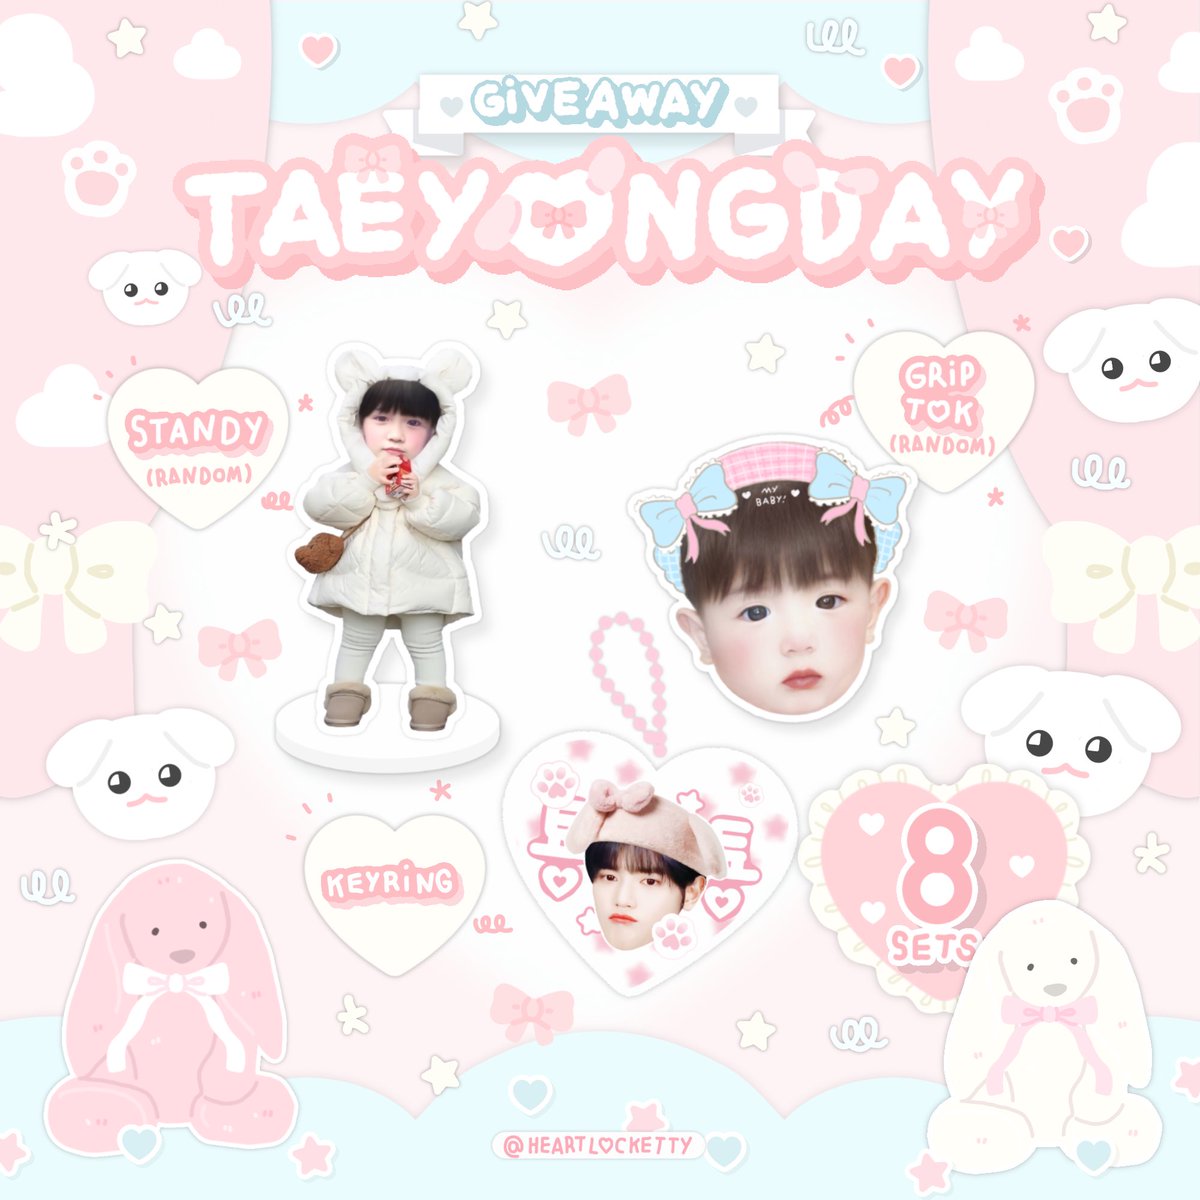 🎀 pls kindly rt ❤︎︎ สุ่มแจก keyring 

giveaway taeyong day

only 8 sets 💌🥛

♡ keyring 1 ea 
♡ standy or griptok 1 ea

✉️ shipping fee 45 baht 
♡ gg form 30/06 ( 20.17 )

#HAPPYTAEYONGDAY 
#TAEYONG